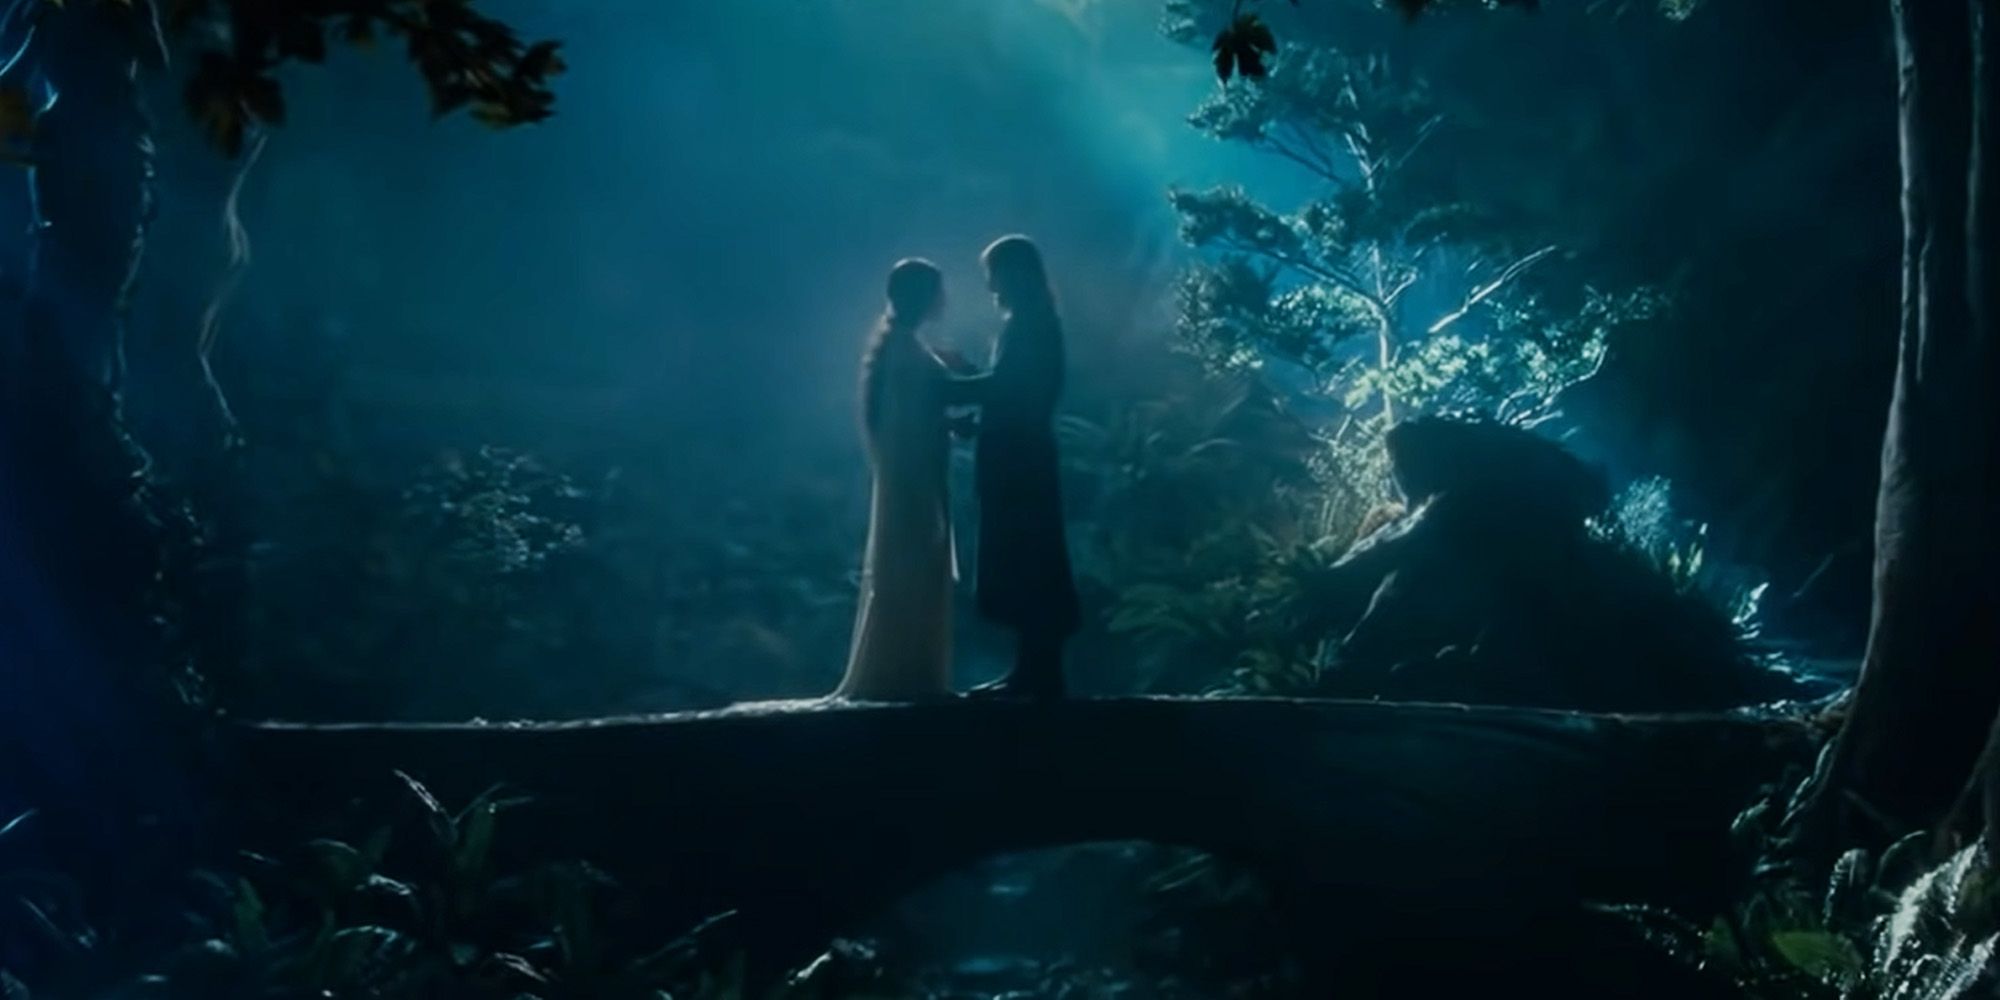 Aragorn and Arwen in Rivendell